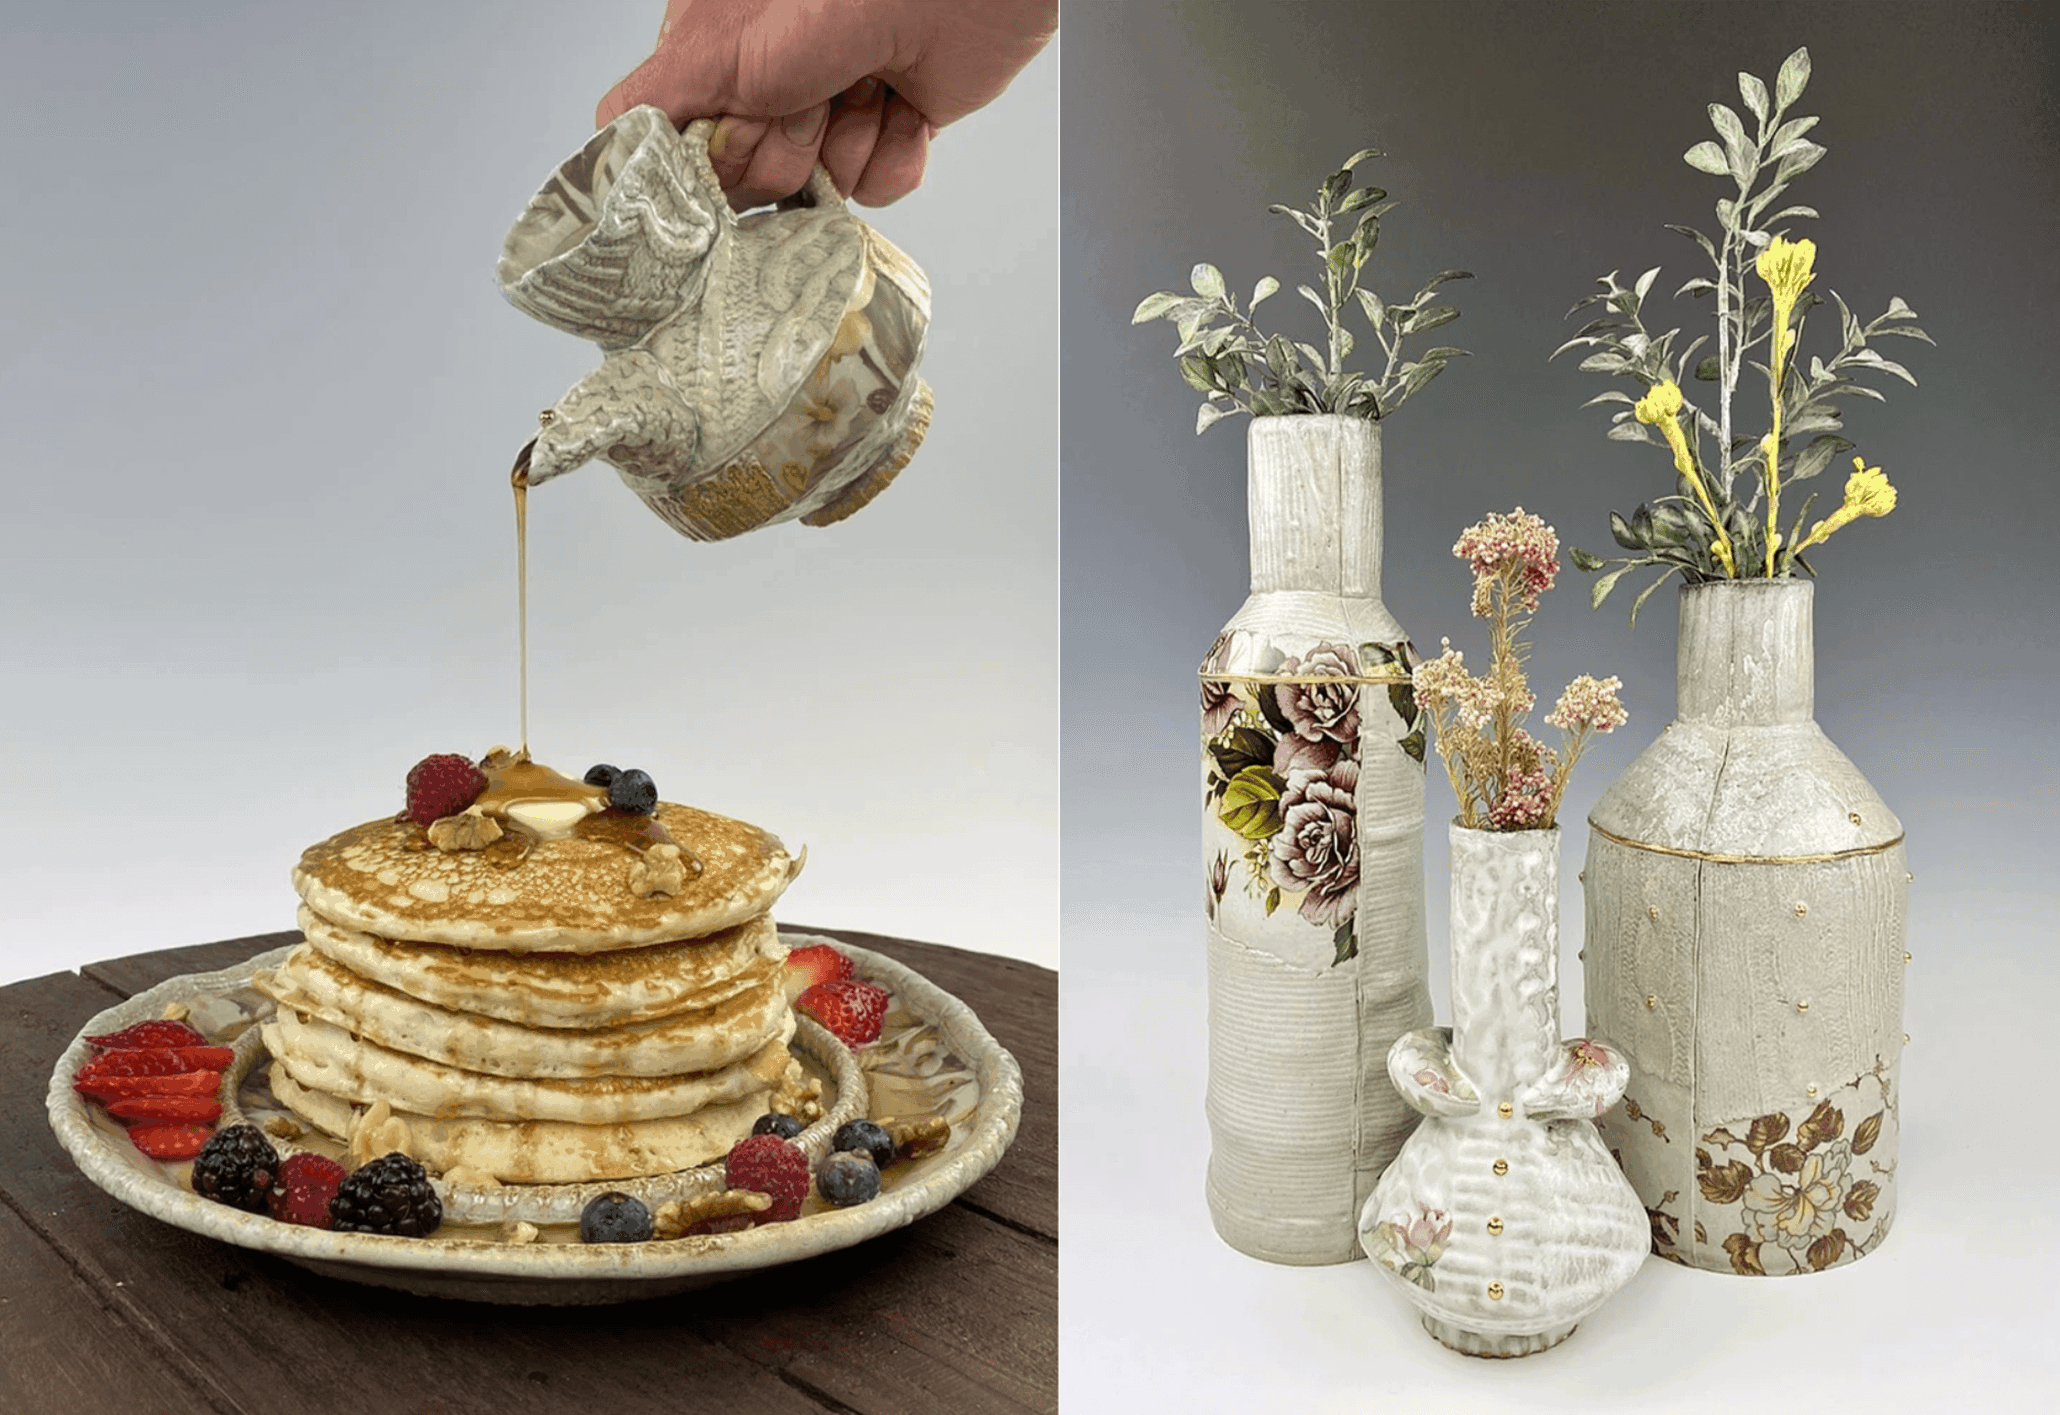 On the left, a ceramic vessel is used to pour syrup on a stack of pancakes. On the right, three ceramic vases hold delicate flowers.